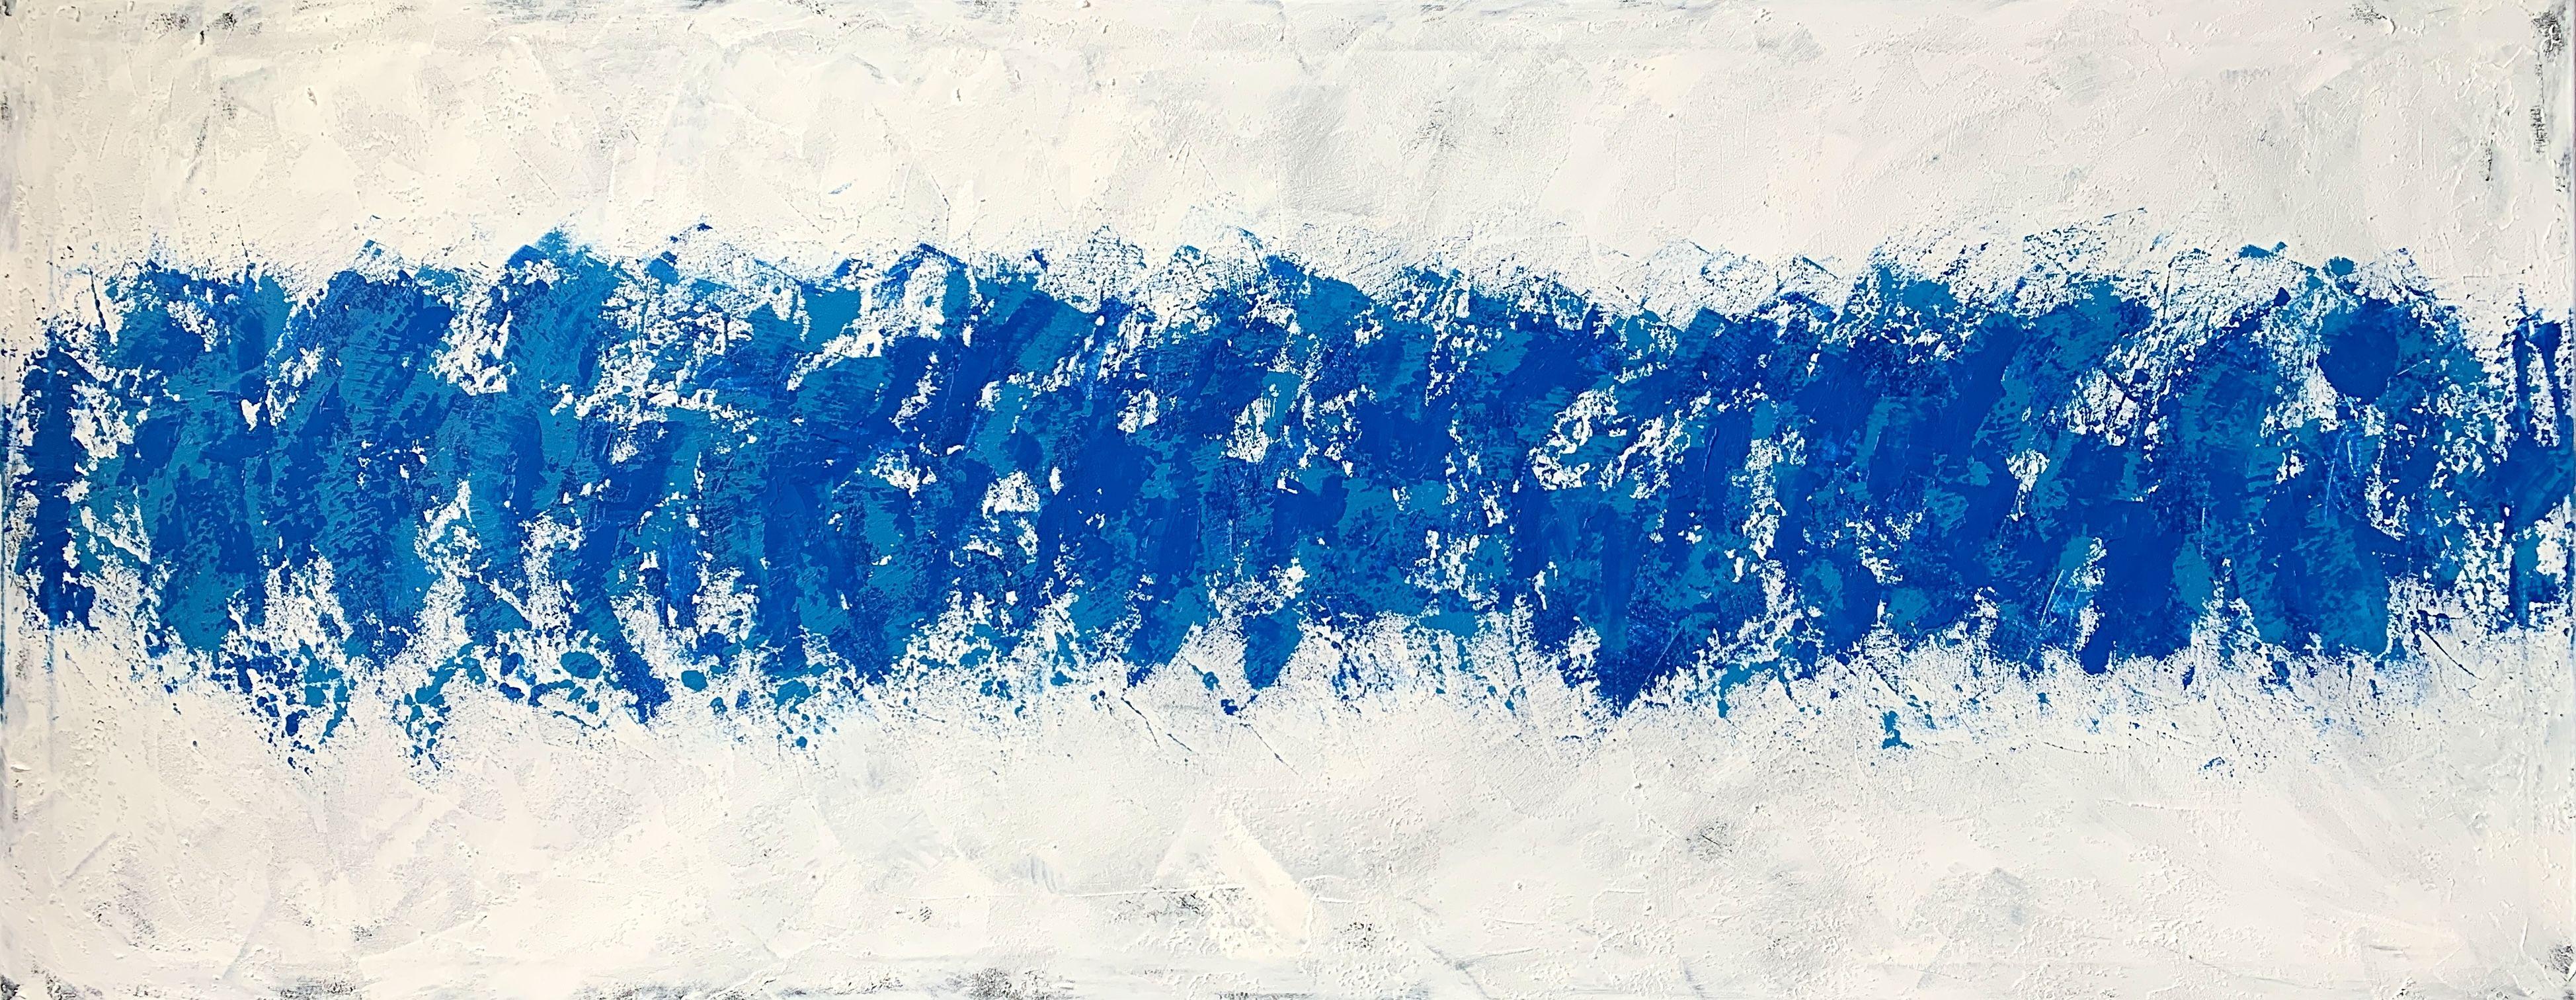 Anita Kaufmann Abstract Painting - Beyond the sea no. 1423 blue and white, Painting, Acrylic on Canvas